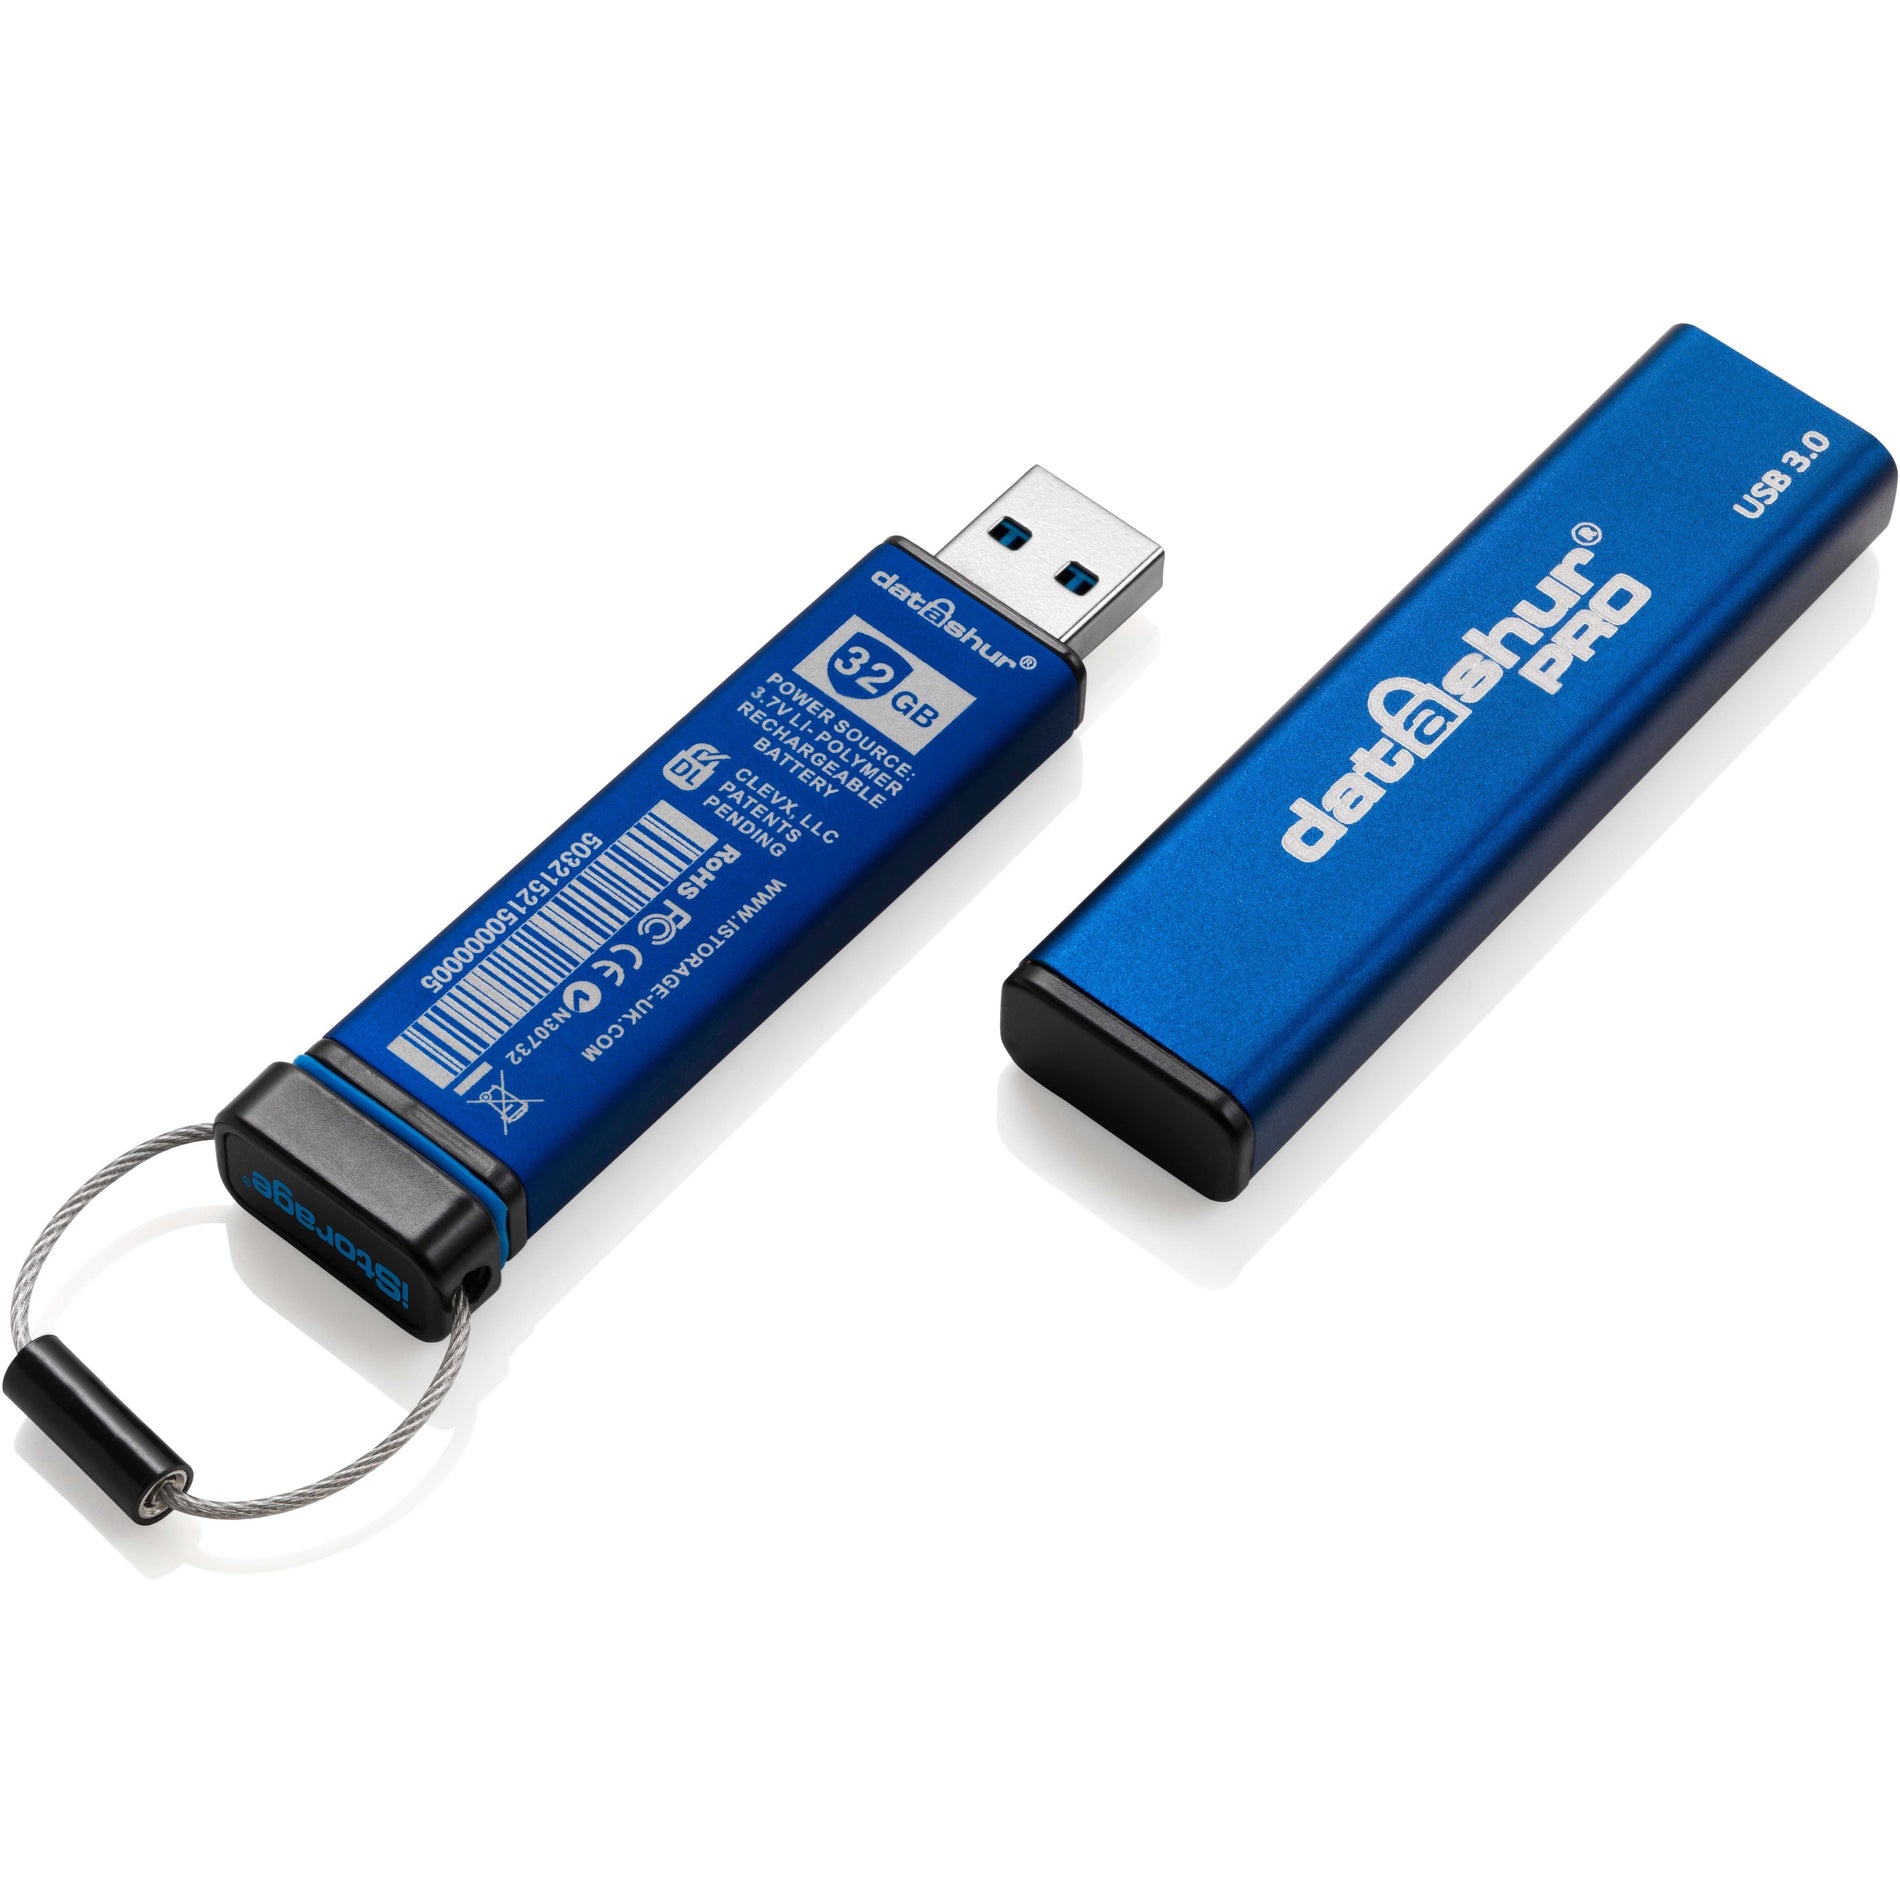 iStorage IS-FL-DA3-256-32 datAshur PRO 32GB USB 3.2 (Gen 1) Type A Flash Drive, Secure, FIPS 140-2 Level 3 Certified, Password Protected, Dust/Water Resistant